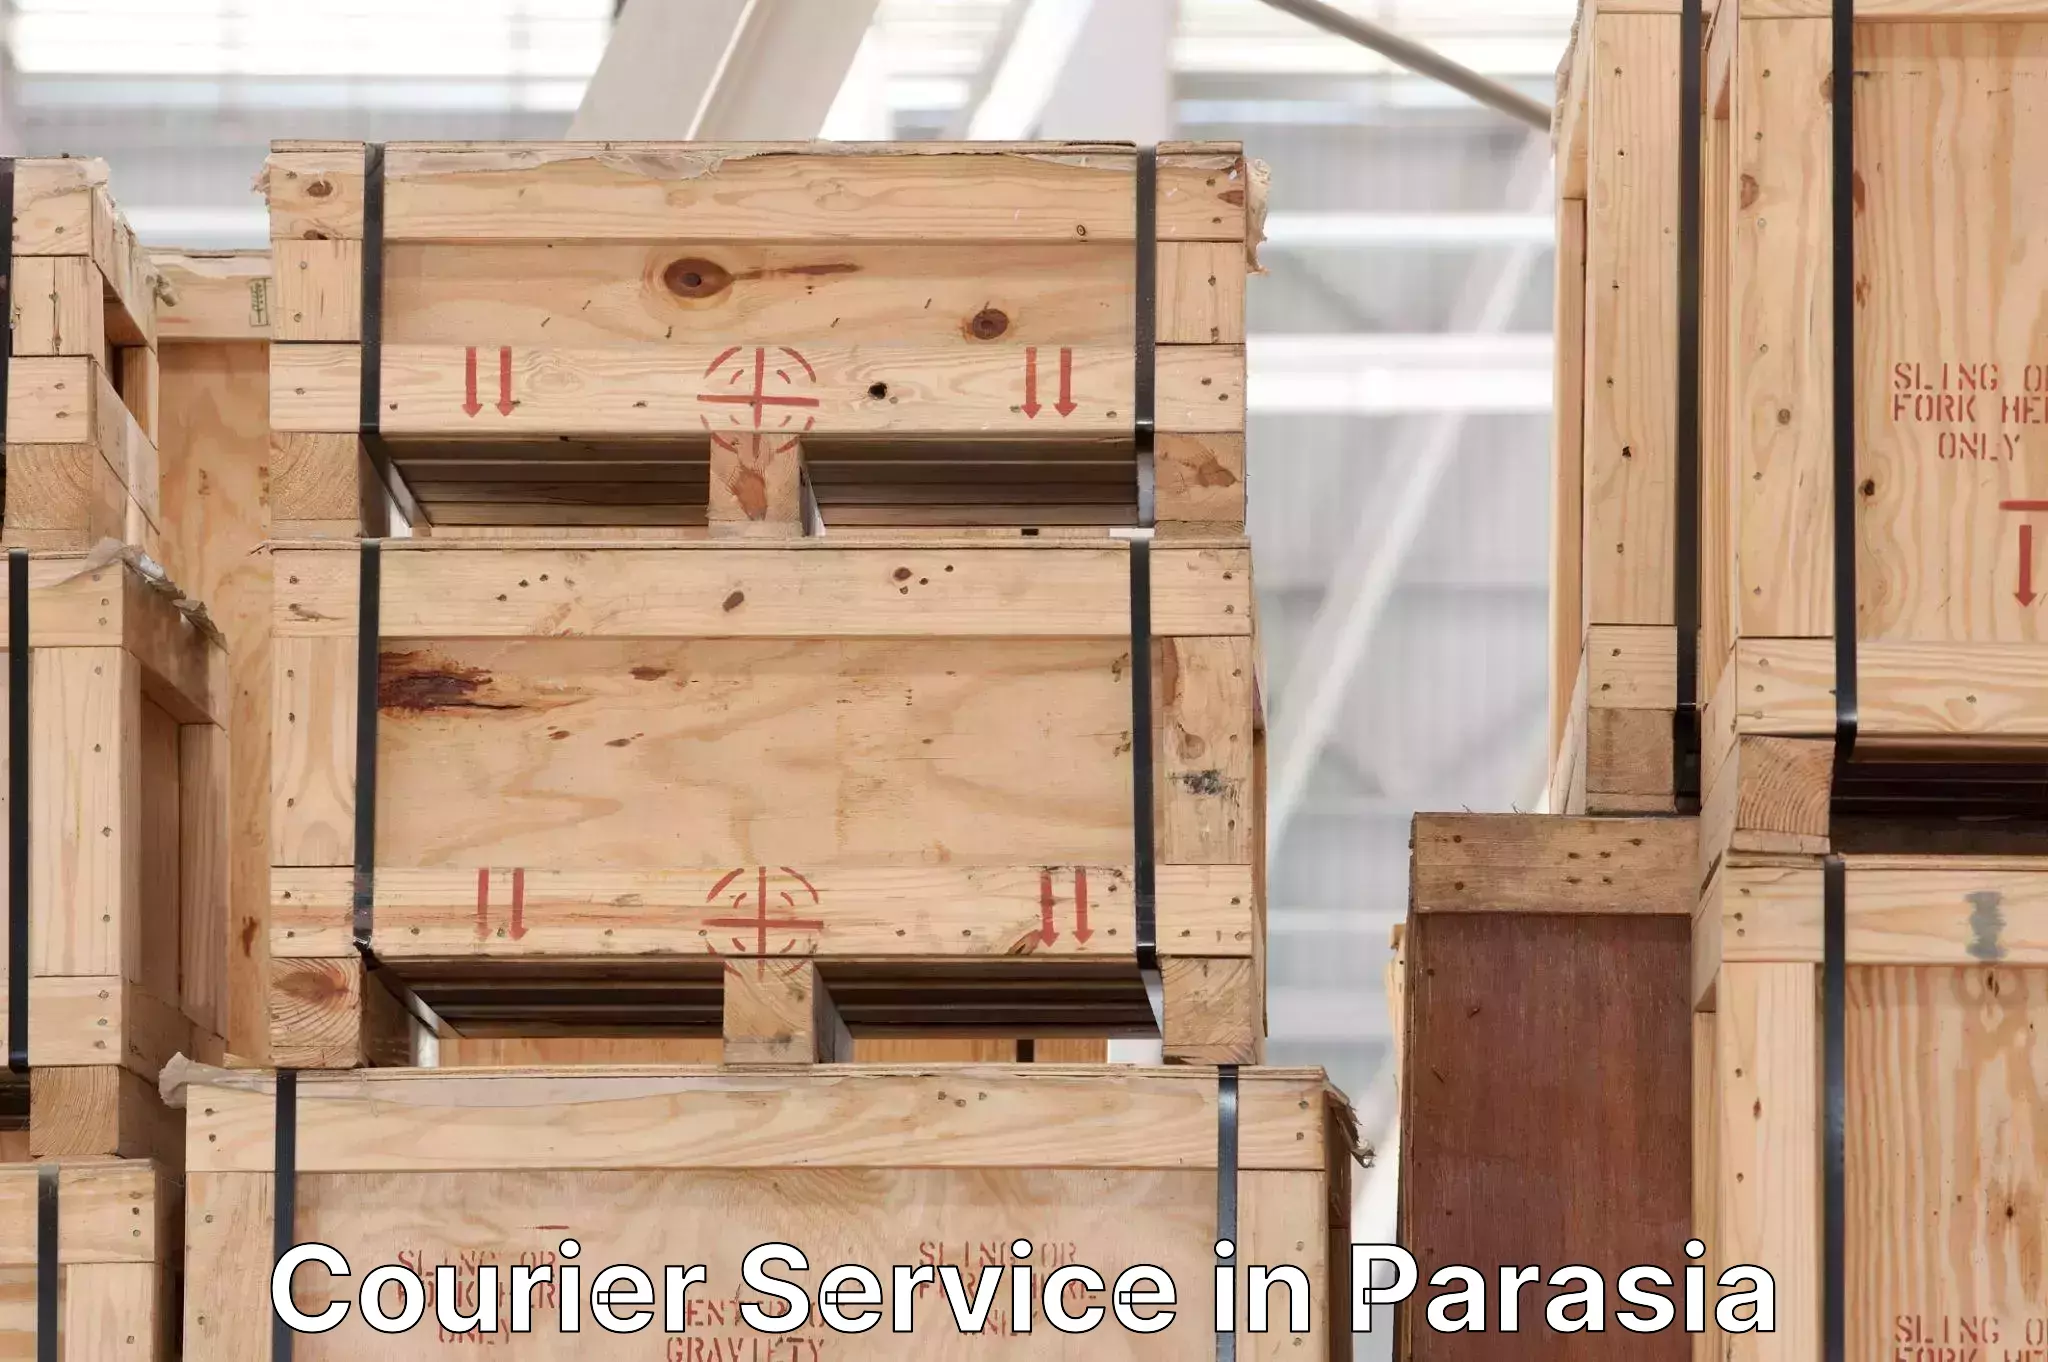 Express package services in Parasia